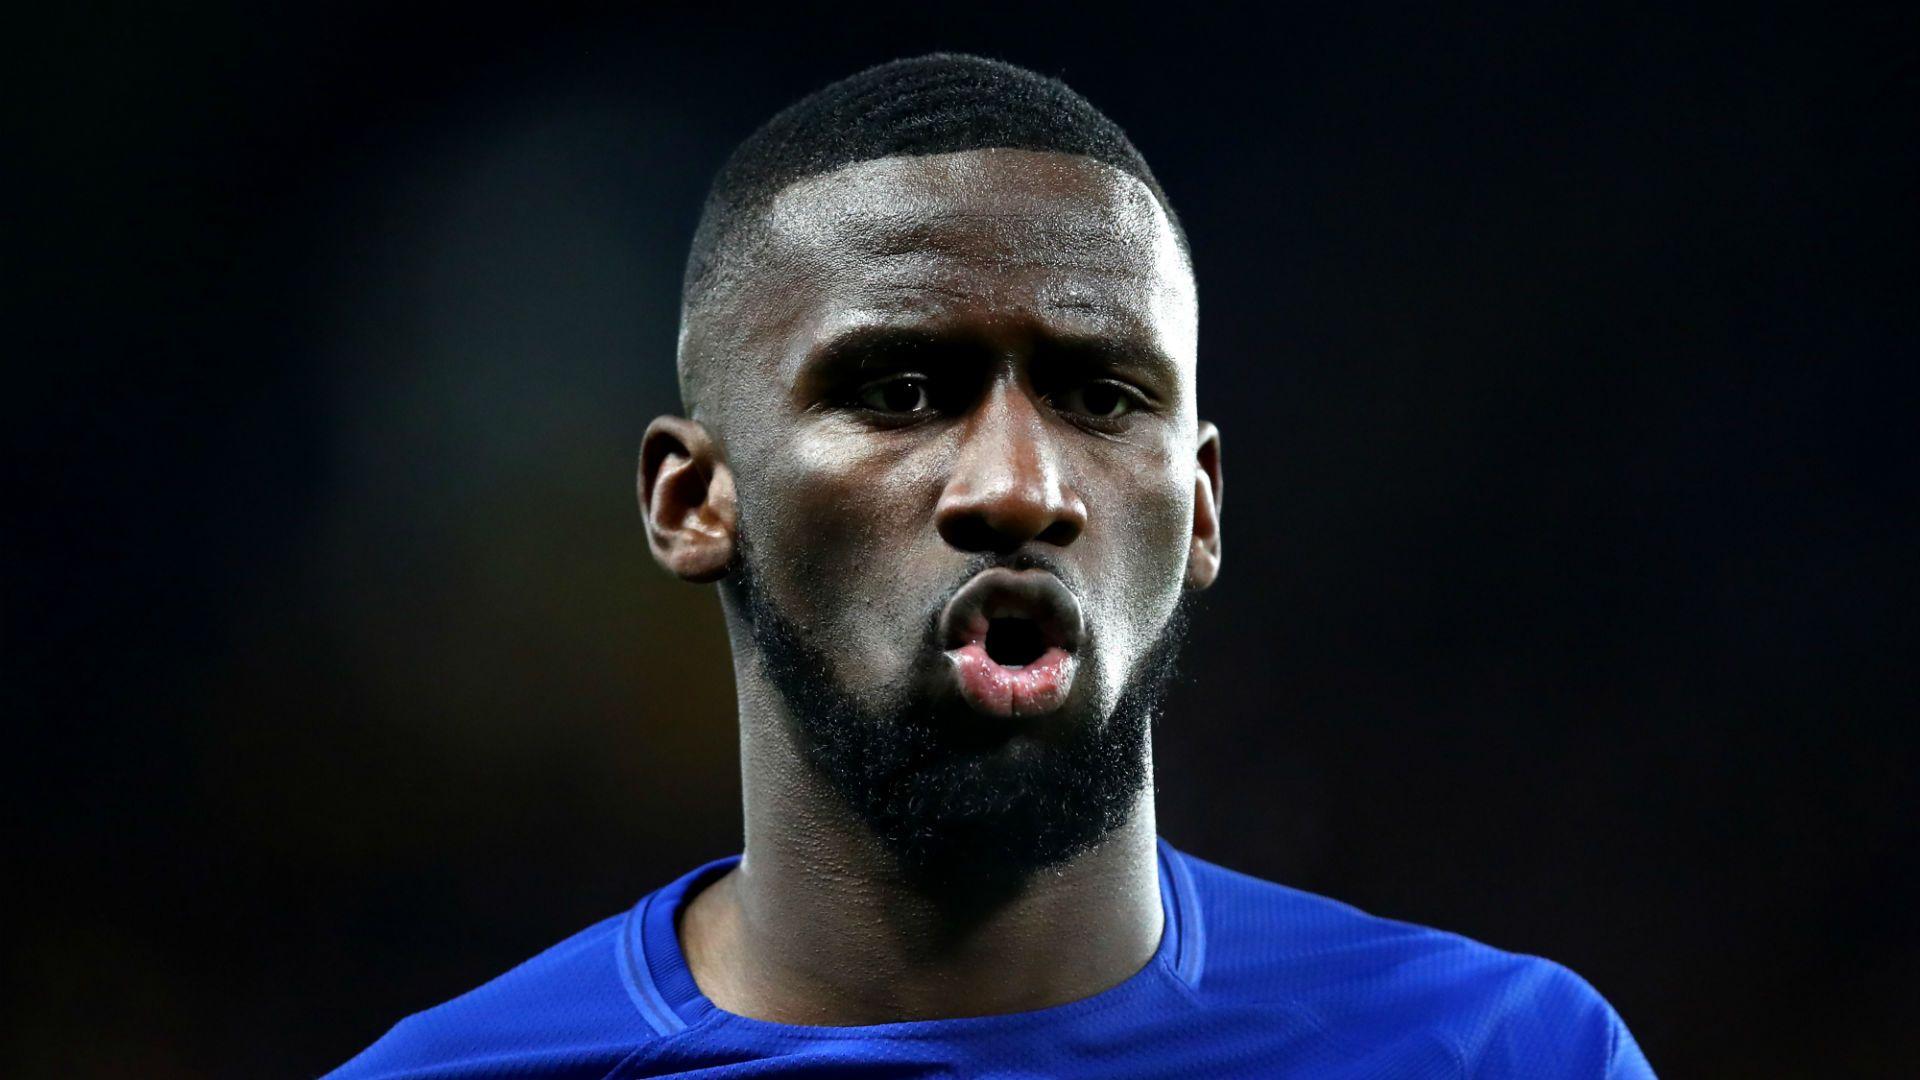 Rudiger intends to win at Chelsea, with or without Conte. Soccer